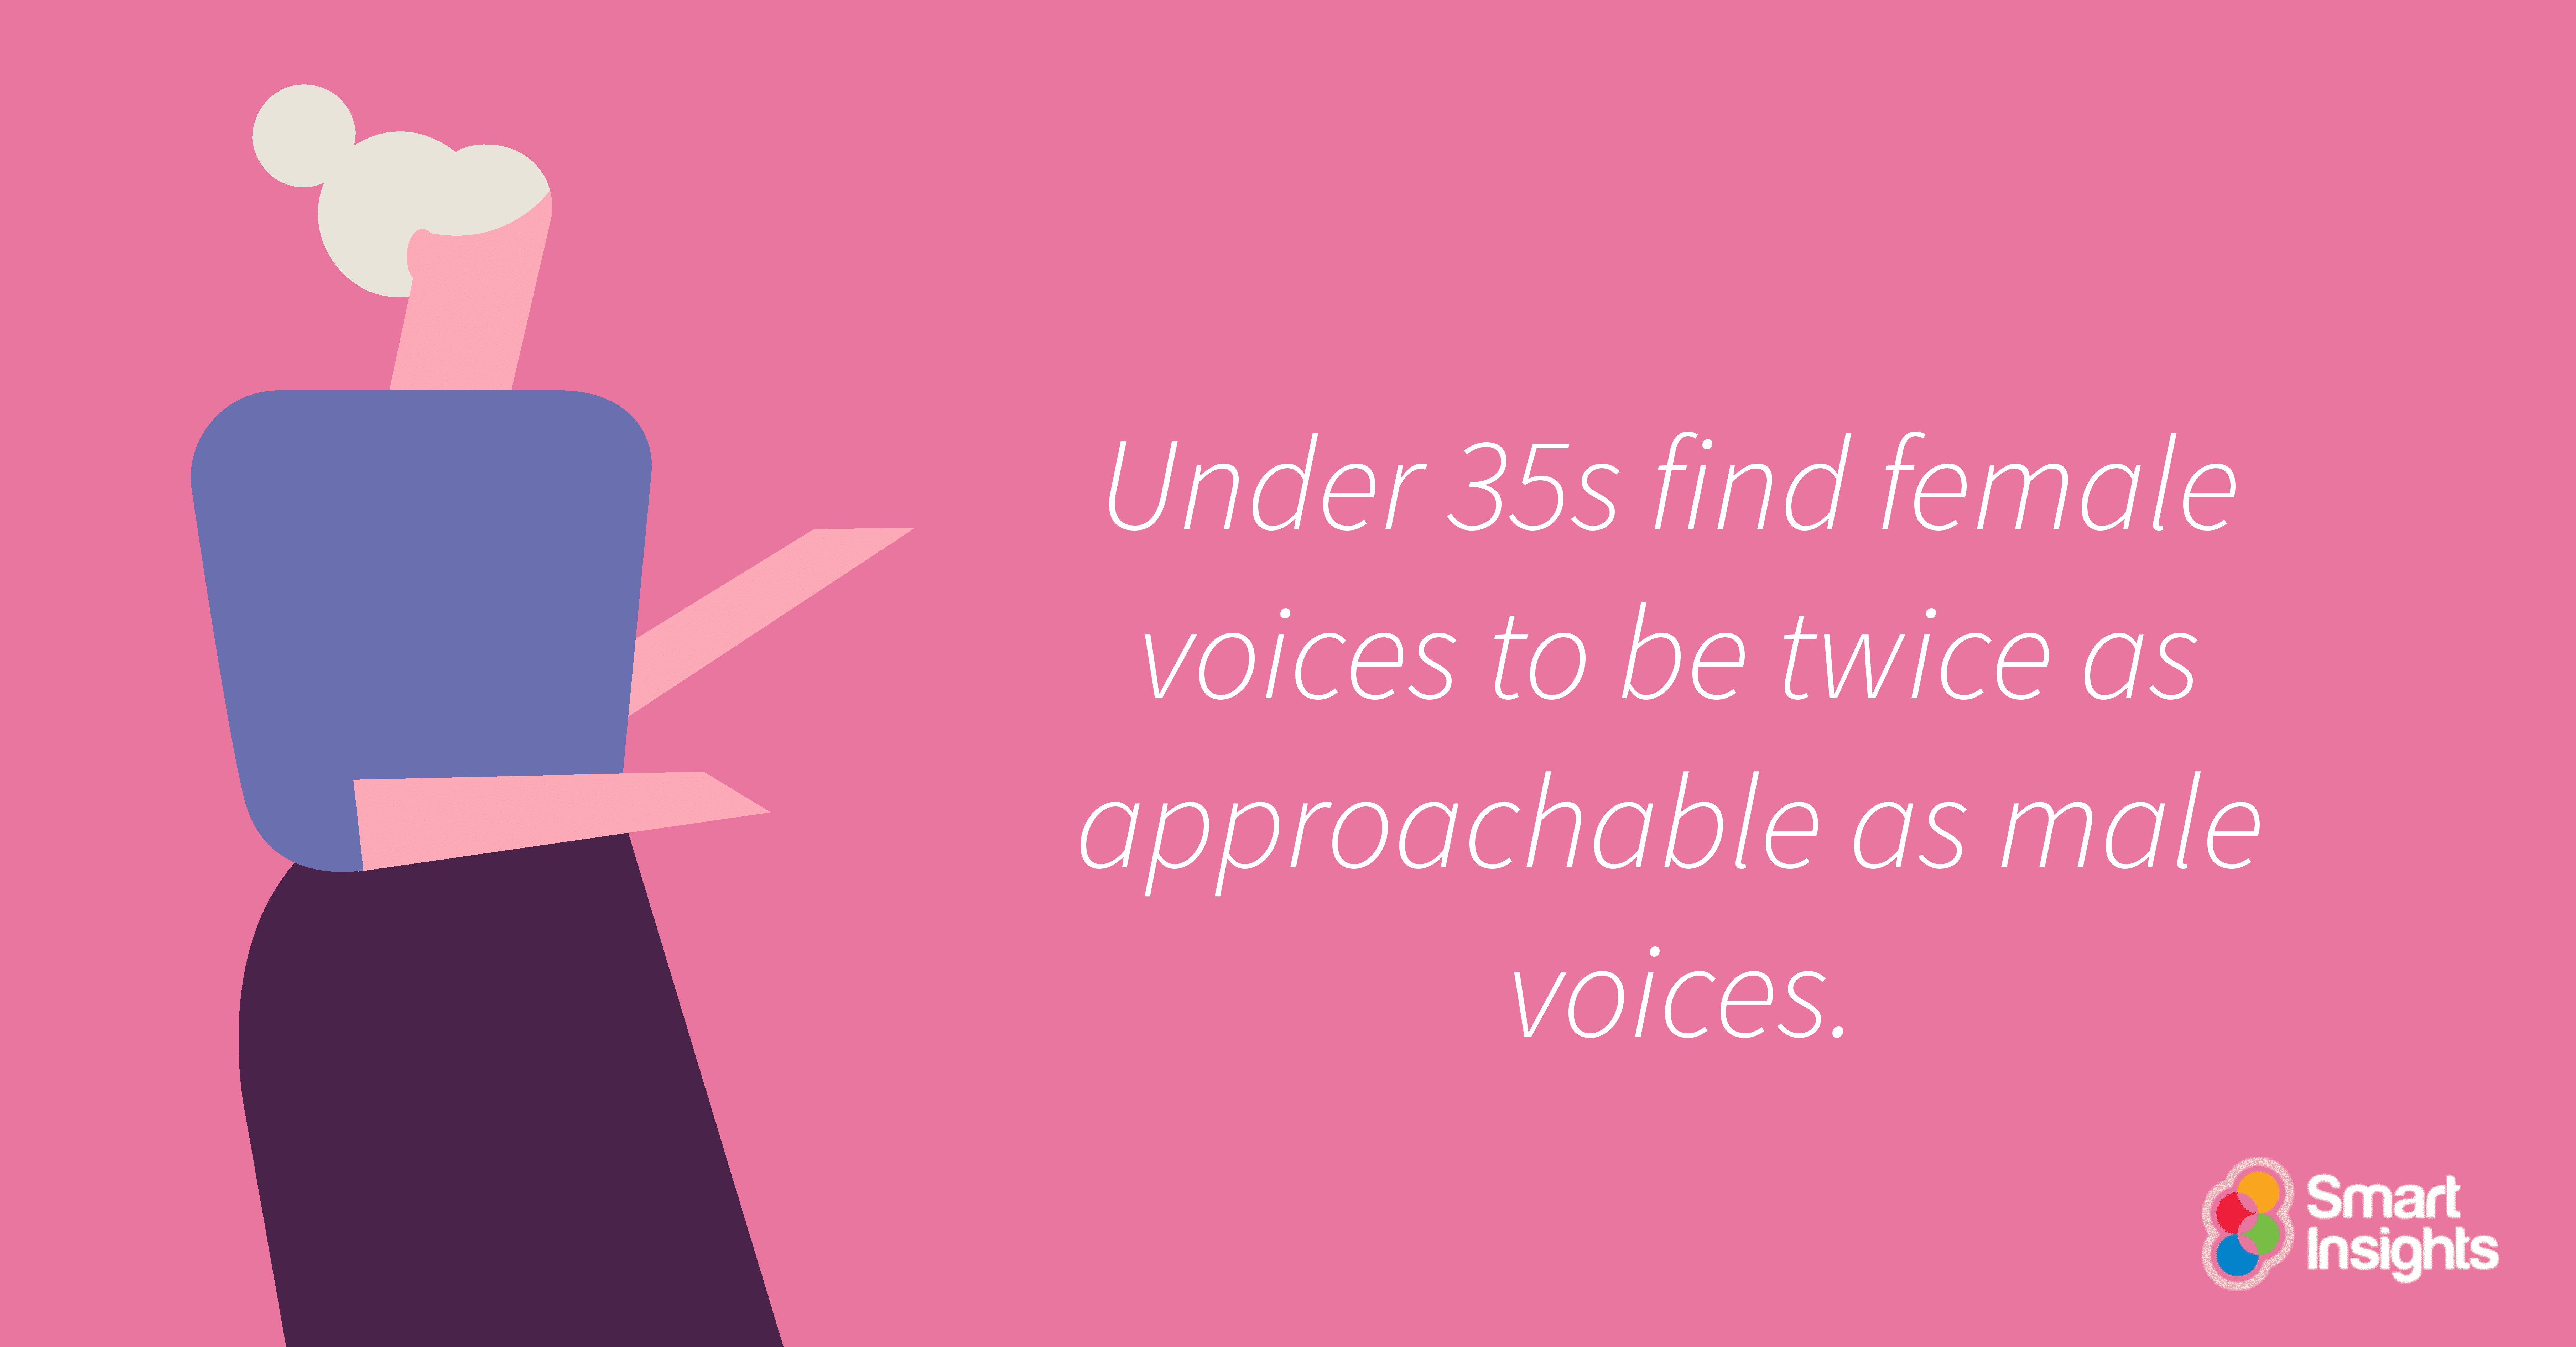 Under 35s find female voices twice as approachable as male voices